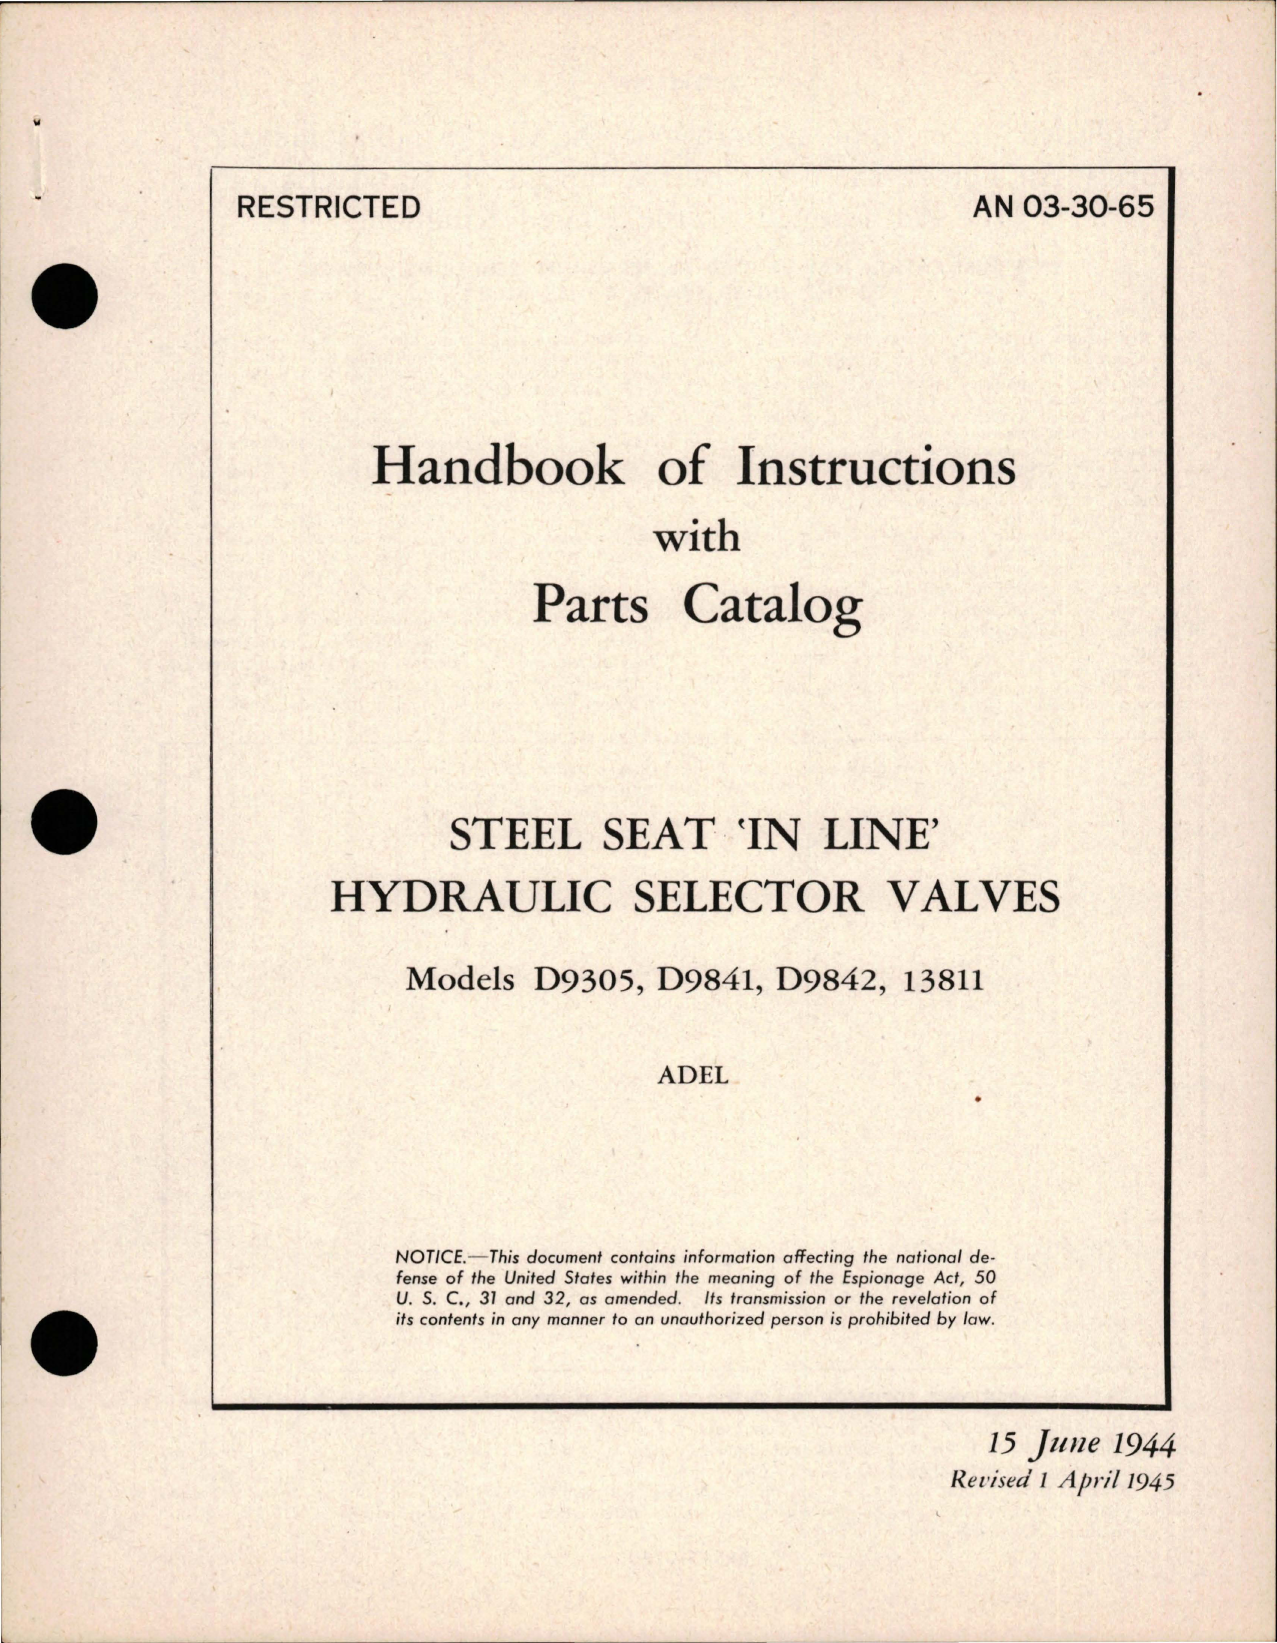 Sample page 1 from AirCorps Library document: Instructions with Parts Catalog for Steel Seat 'In Line' Hydraulic Selector Valves - Models D9305, D9841, D9842, and 13811 